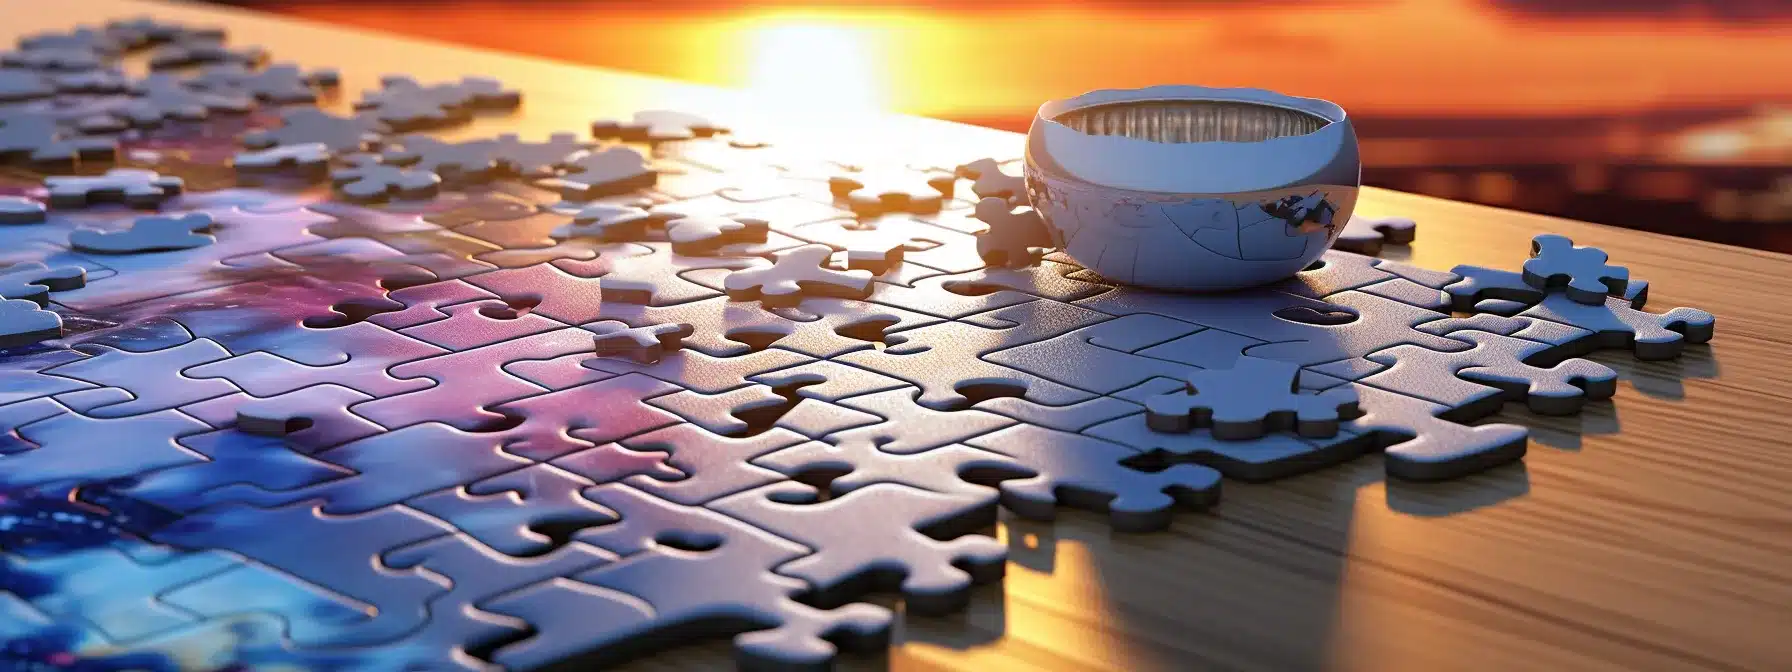 A Completed Jigsaw Puzzle With A Brand Strategy Piece As The Anchor.